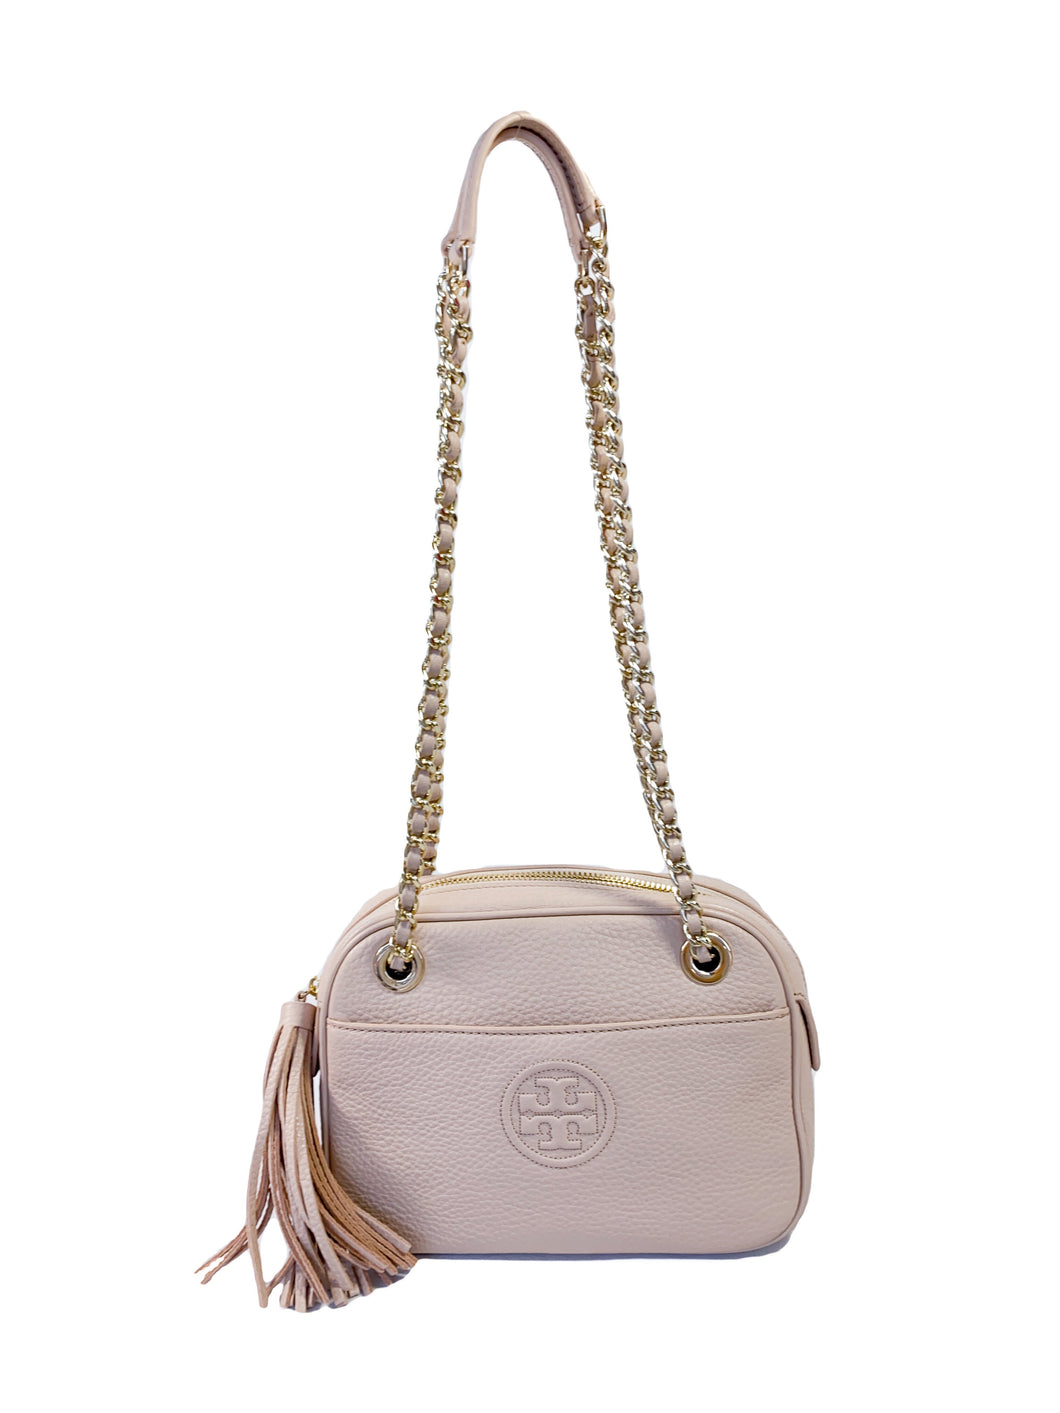 Tory Burch blush pink leather convertible bag